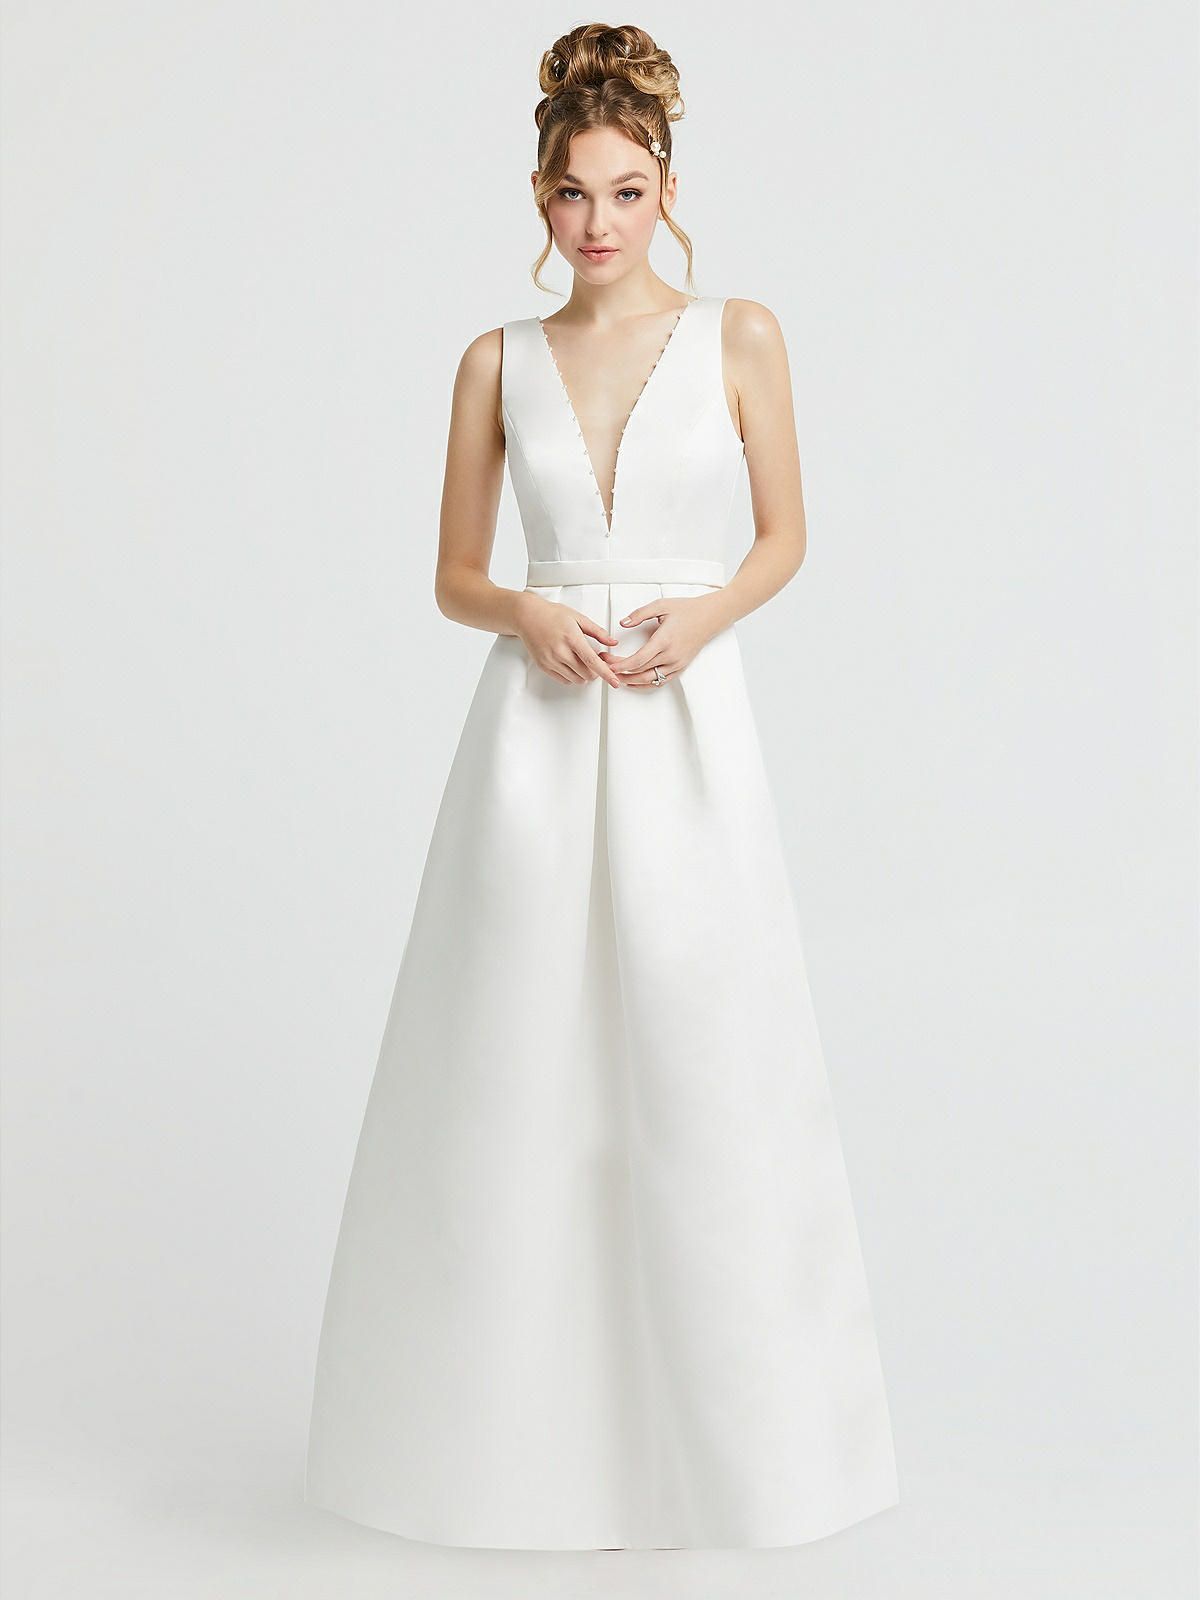 Pearl-Trimmed Deep V-Neck Satin Wedding Dress with Pockets | The Dessy Group